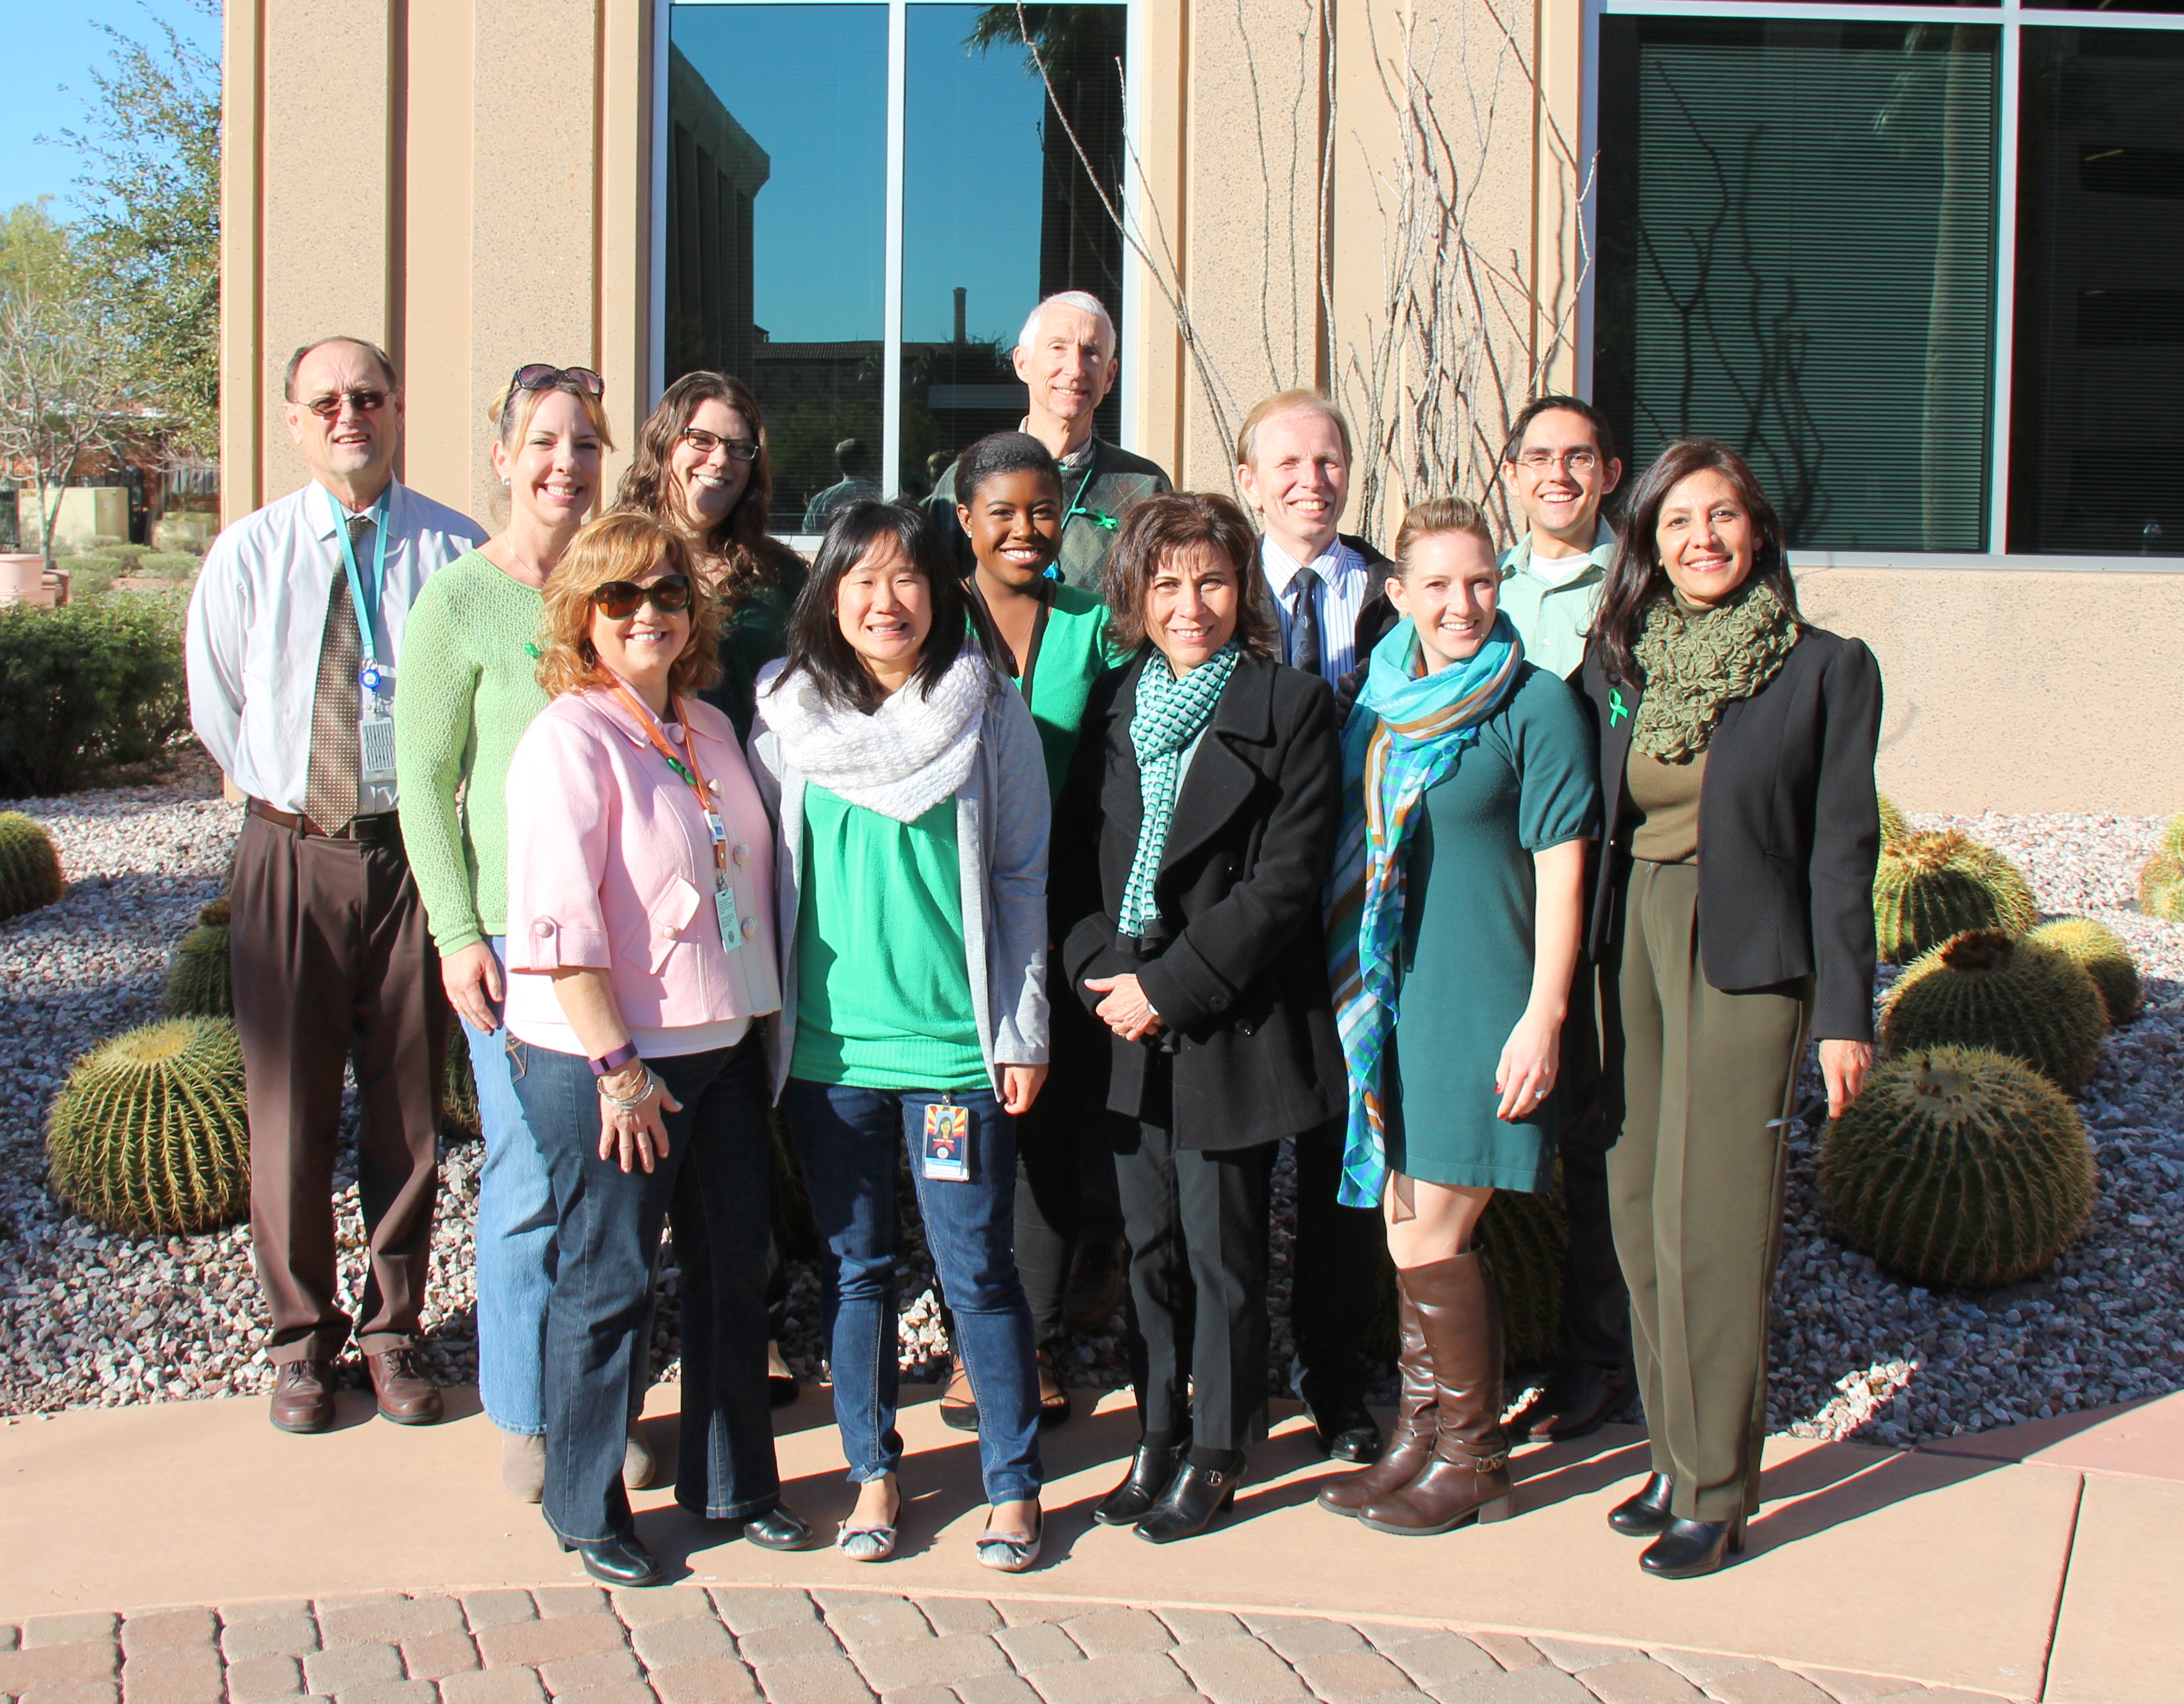 Our employees wore green and jeans this week to raise awareness of folic acid and its benefits before and during pregnancy.